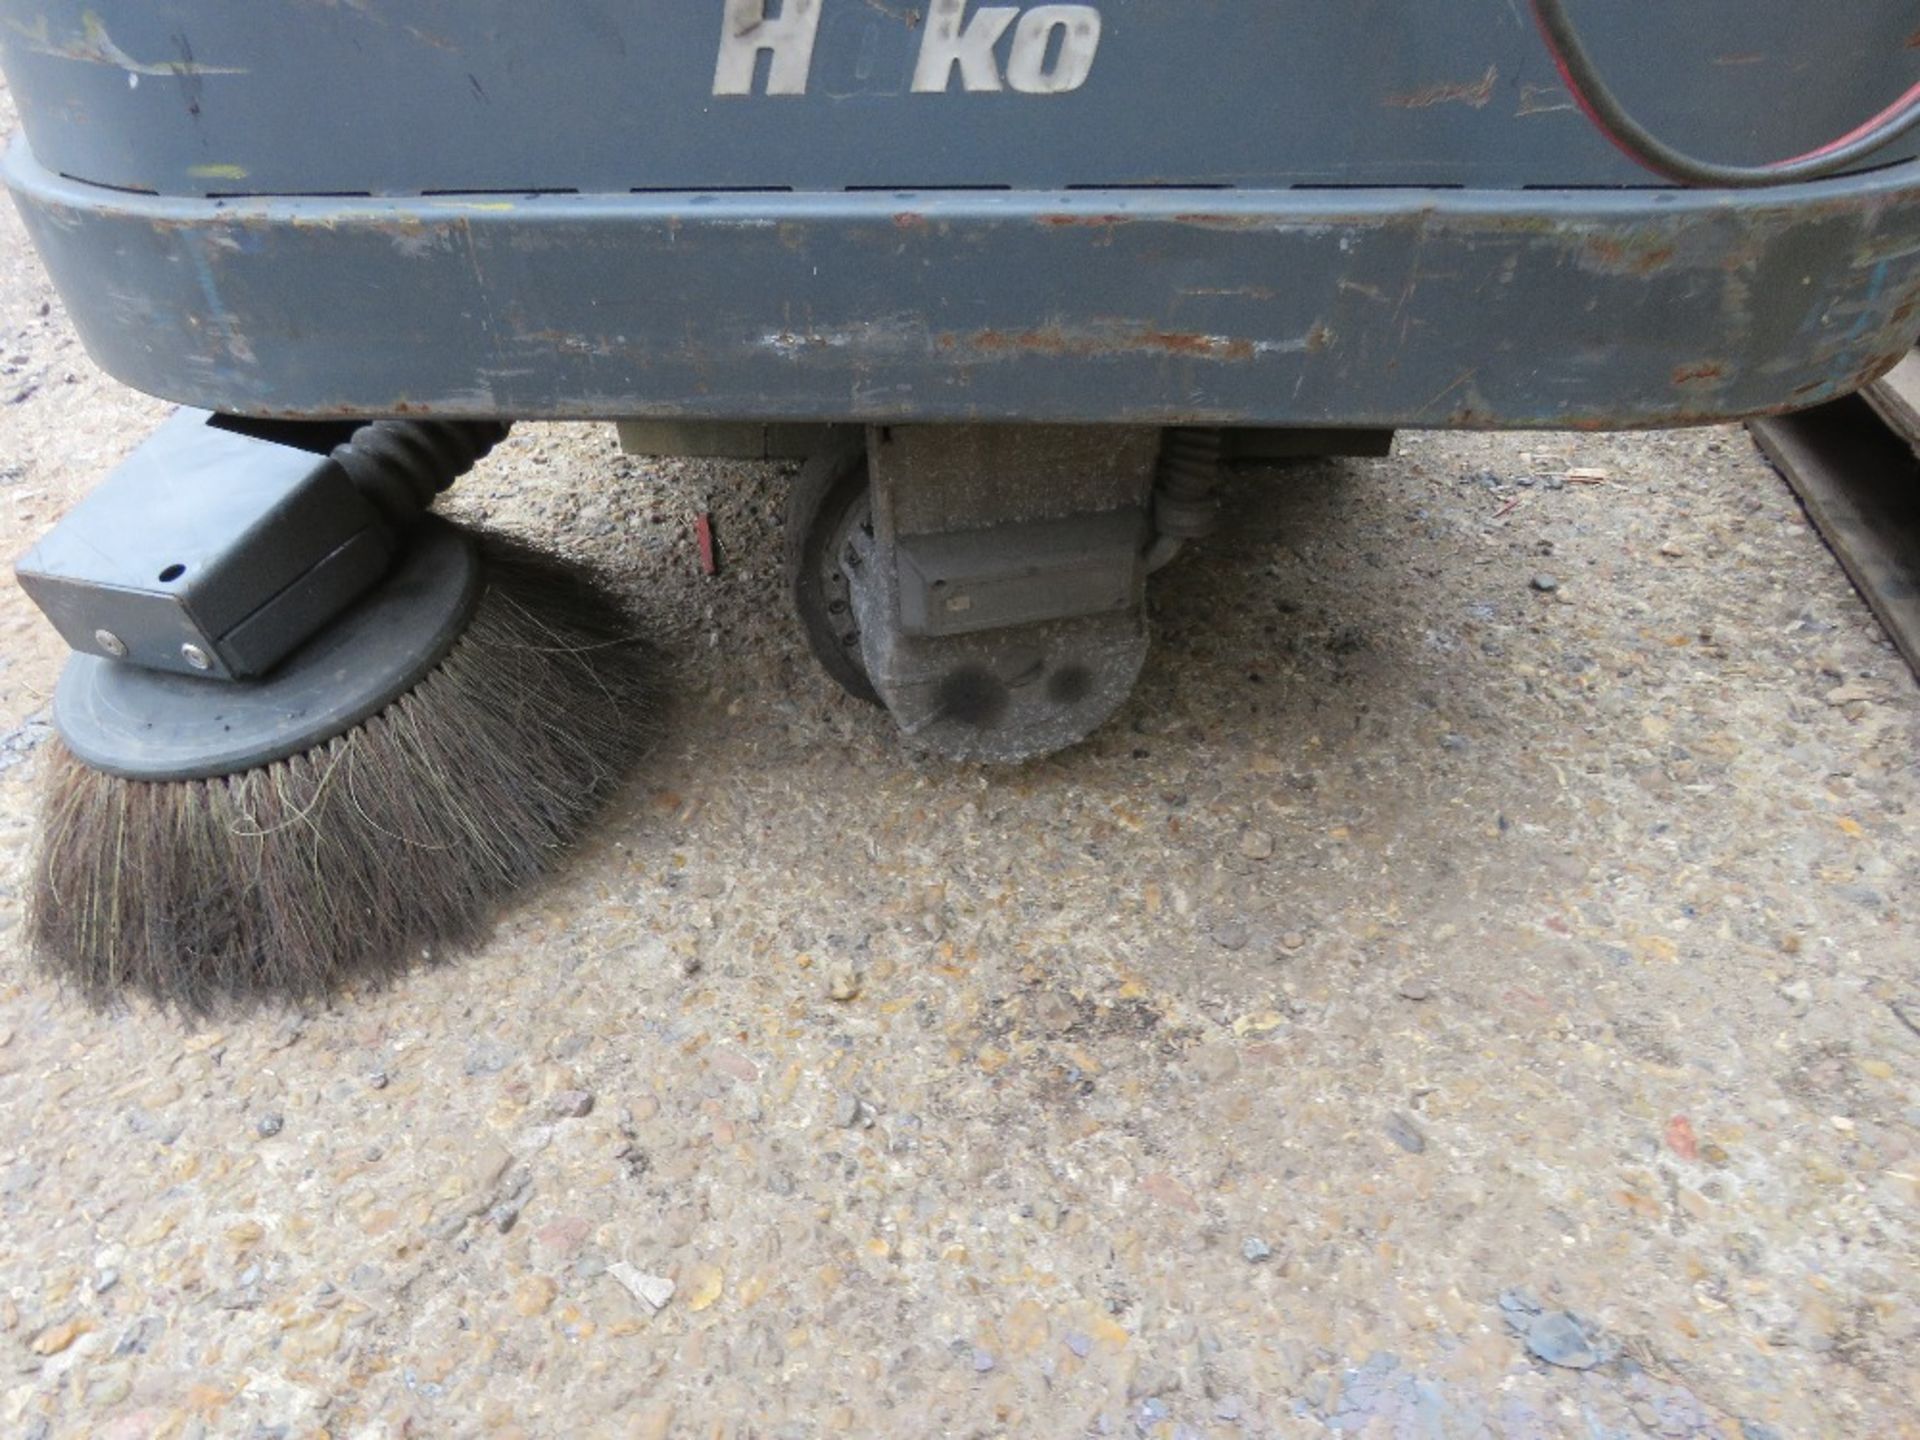 HAKO BATTERY POWERED SWEEPER WITH CHARGER. SOURCED FROM SITE CLOSURE. - Image 3 of 7